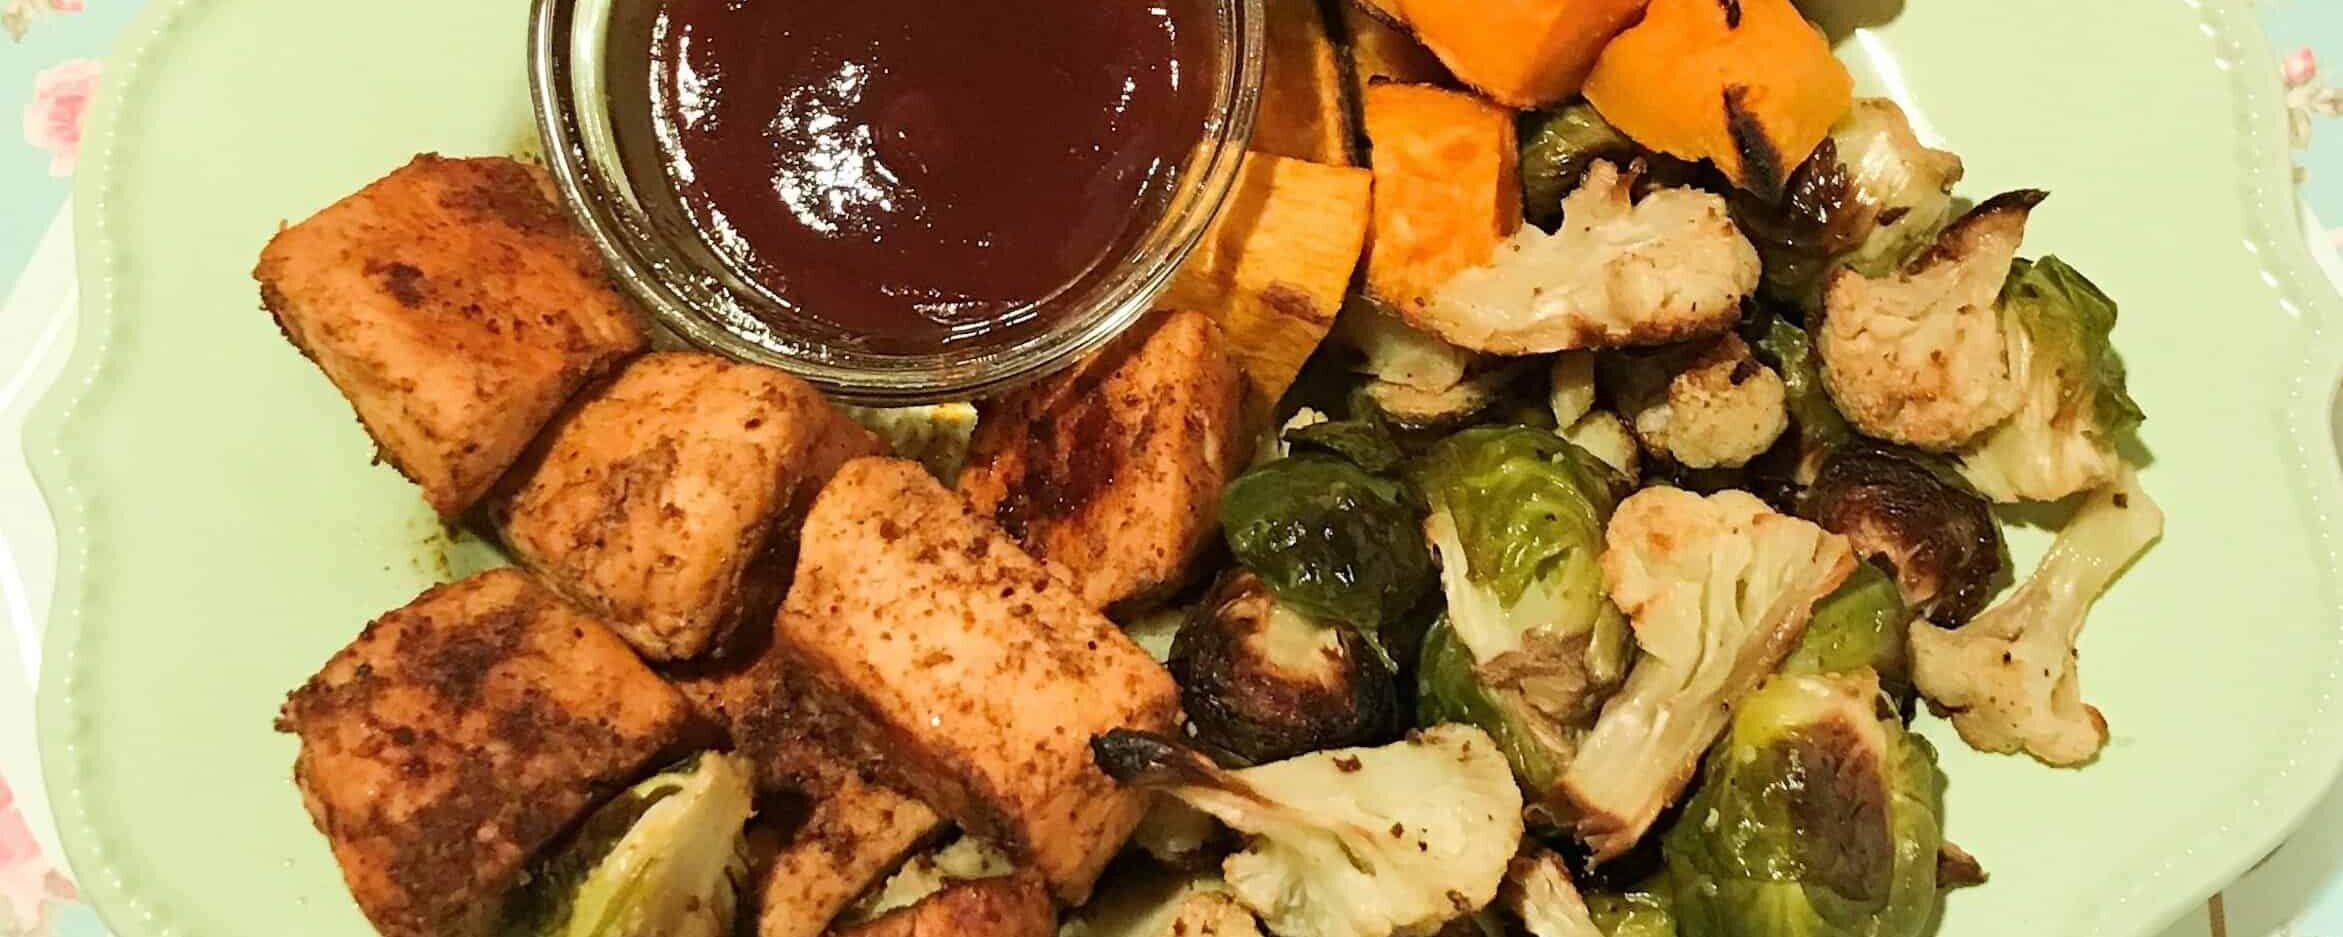 CARE Recipe: BBQ Chicken Bites with Roasted Veggies